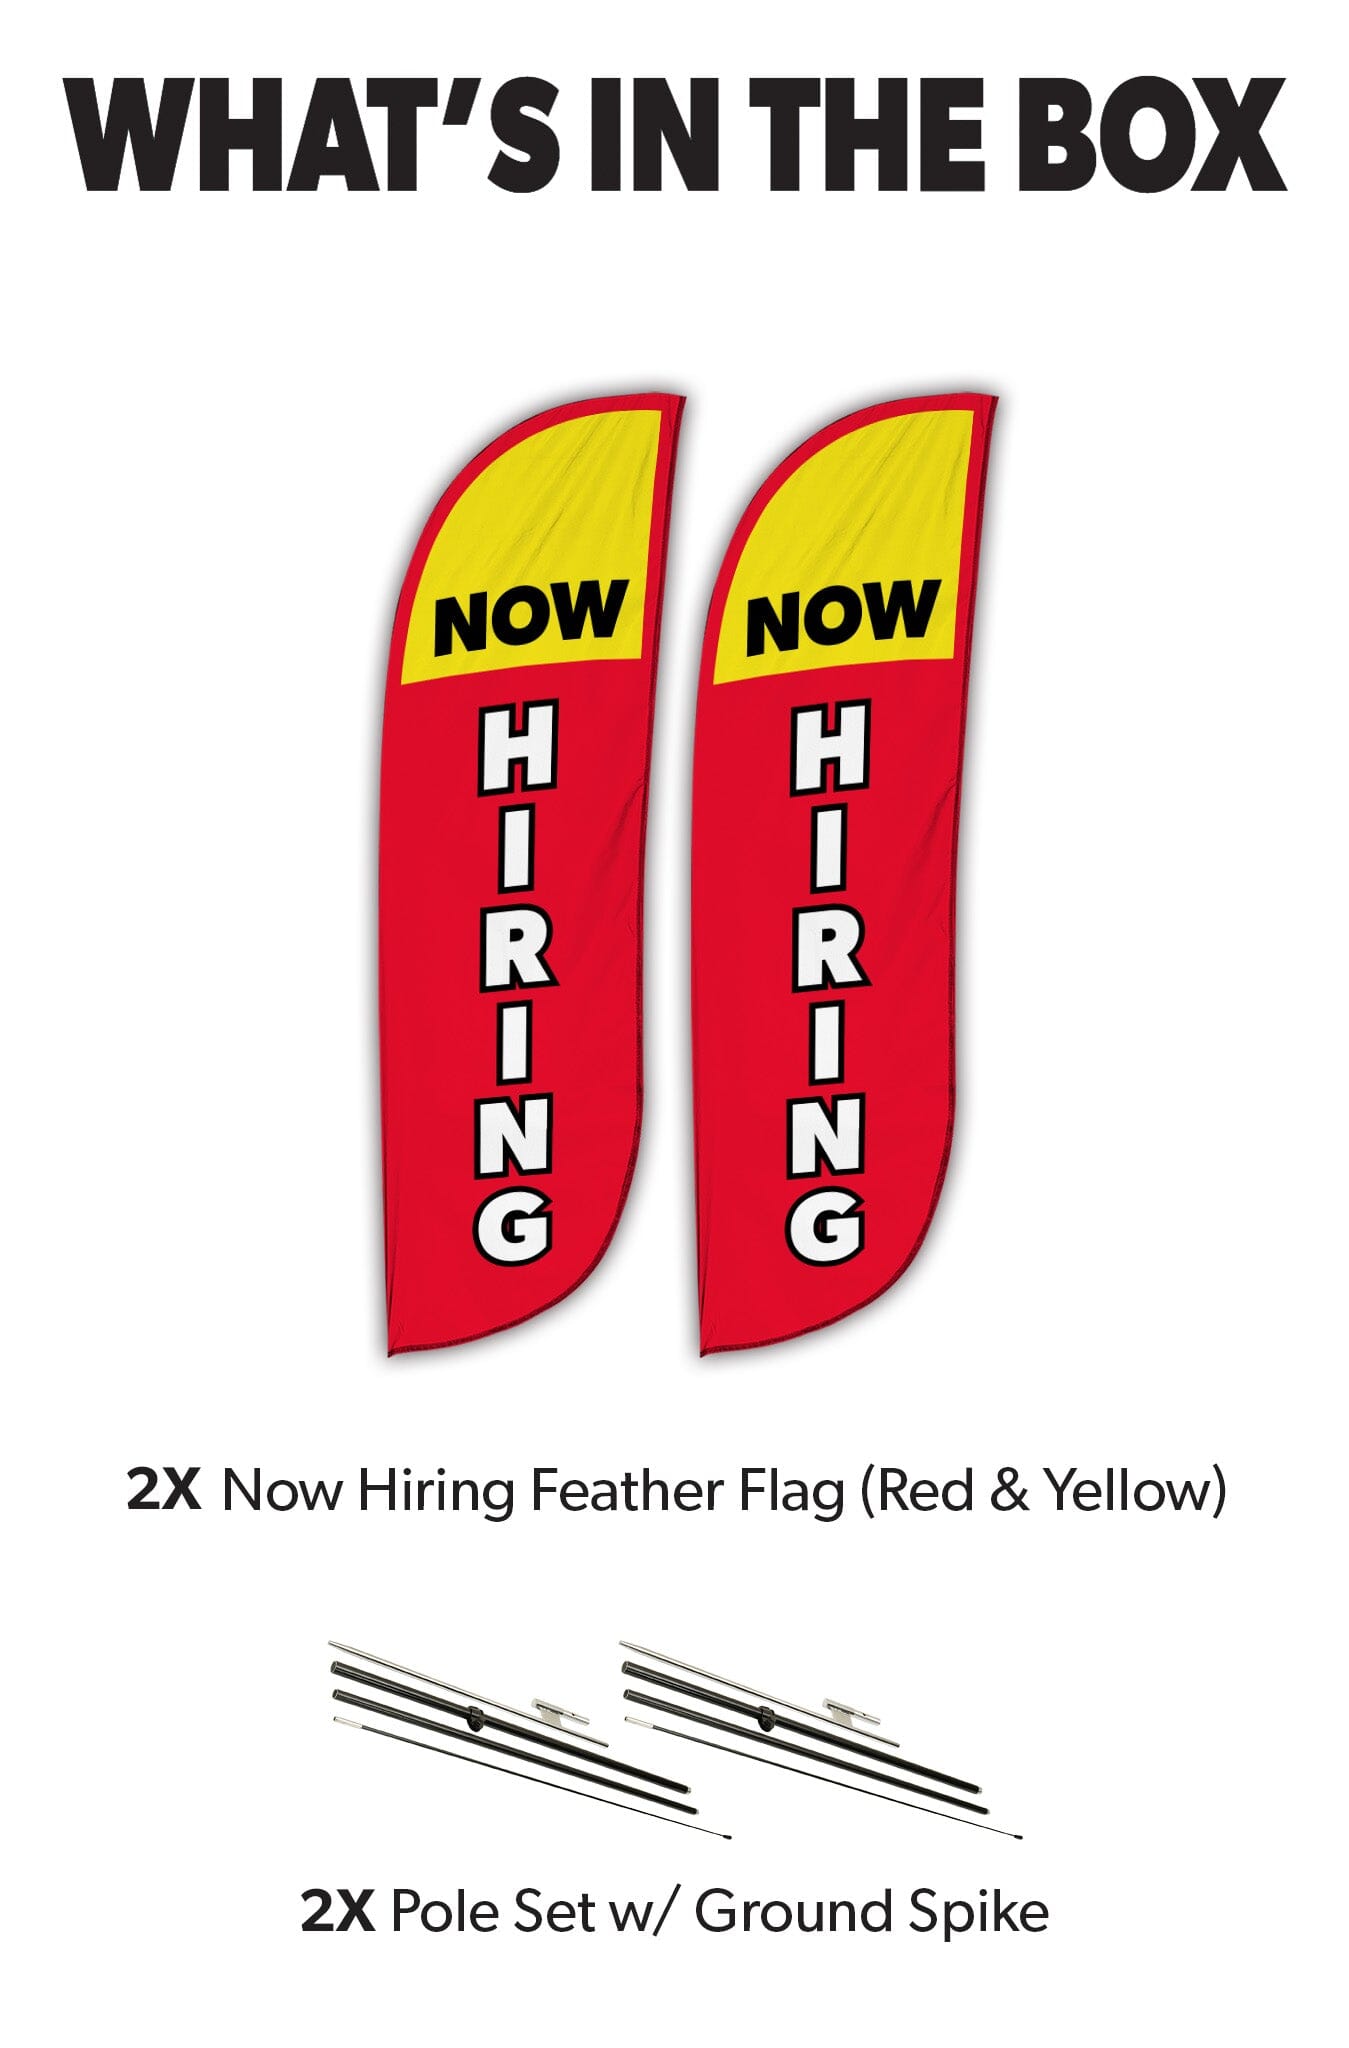 Now Hiring Feather Flag - 2 Pack w/ Ground Spike Pole Set 